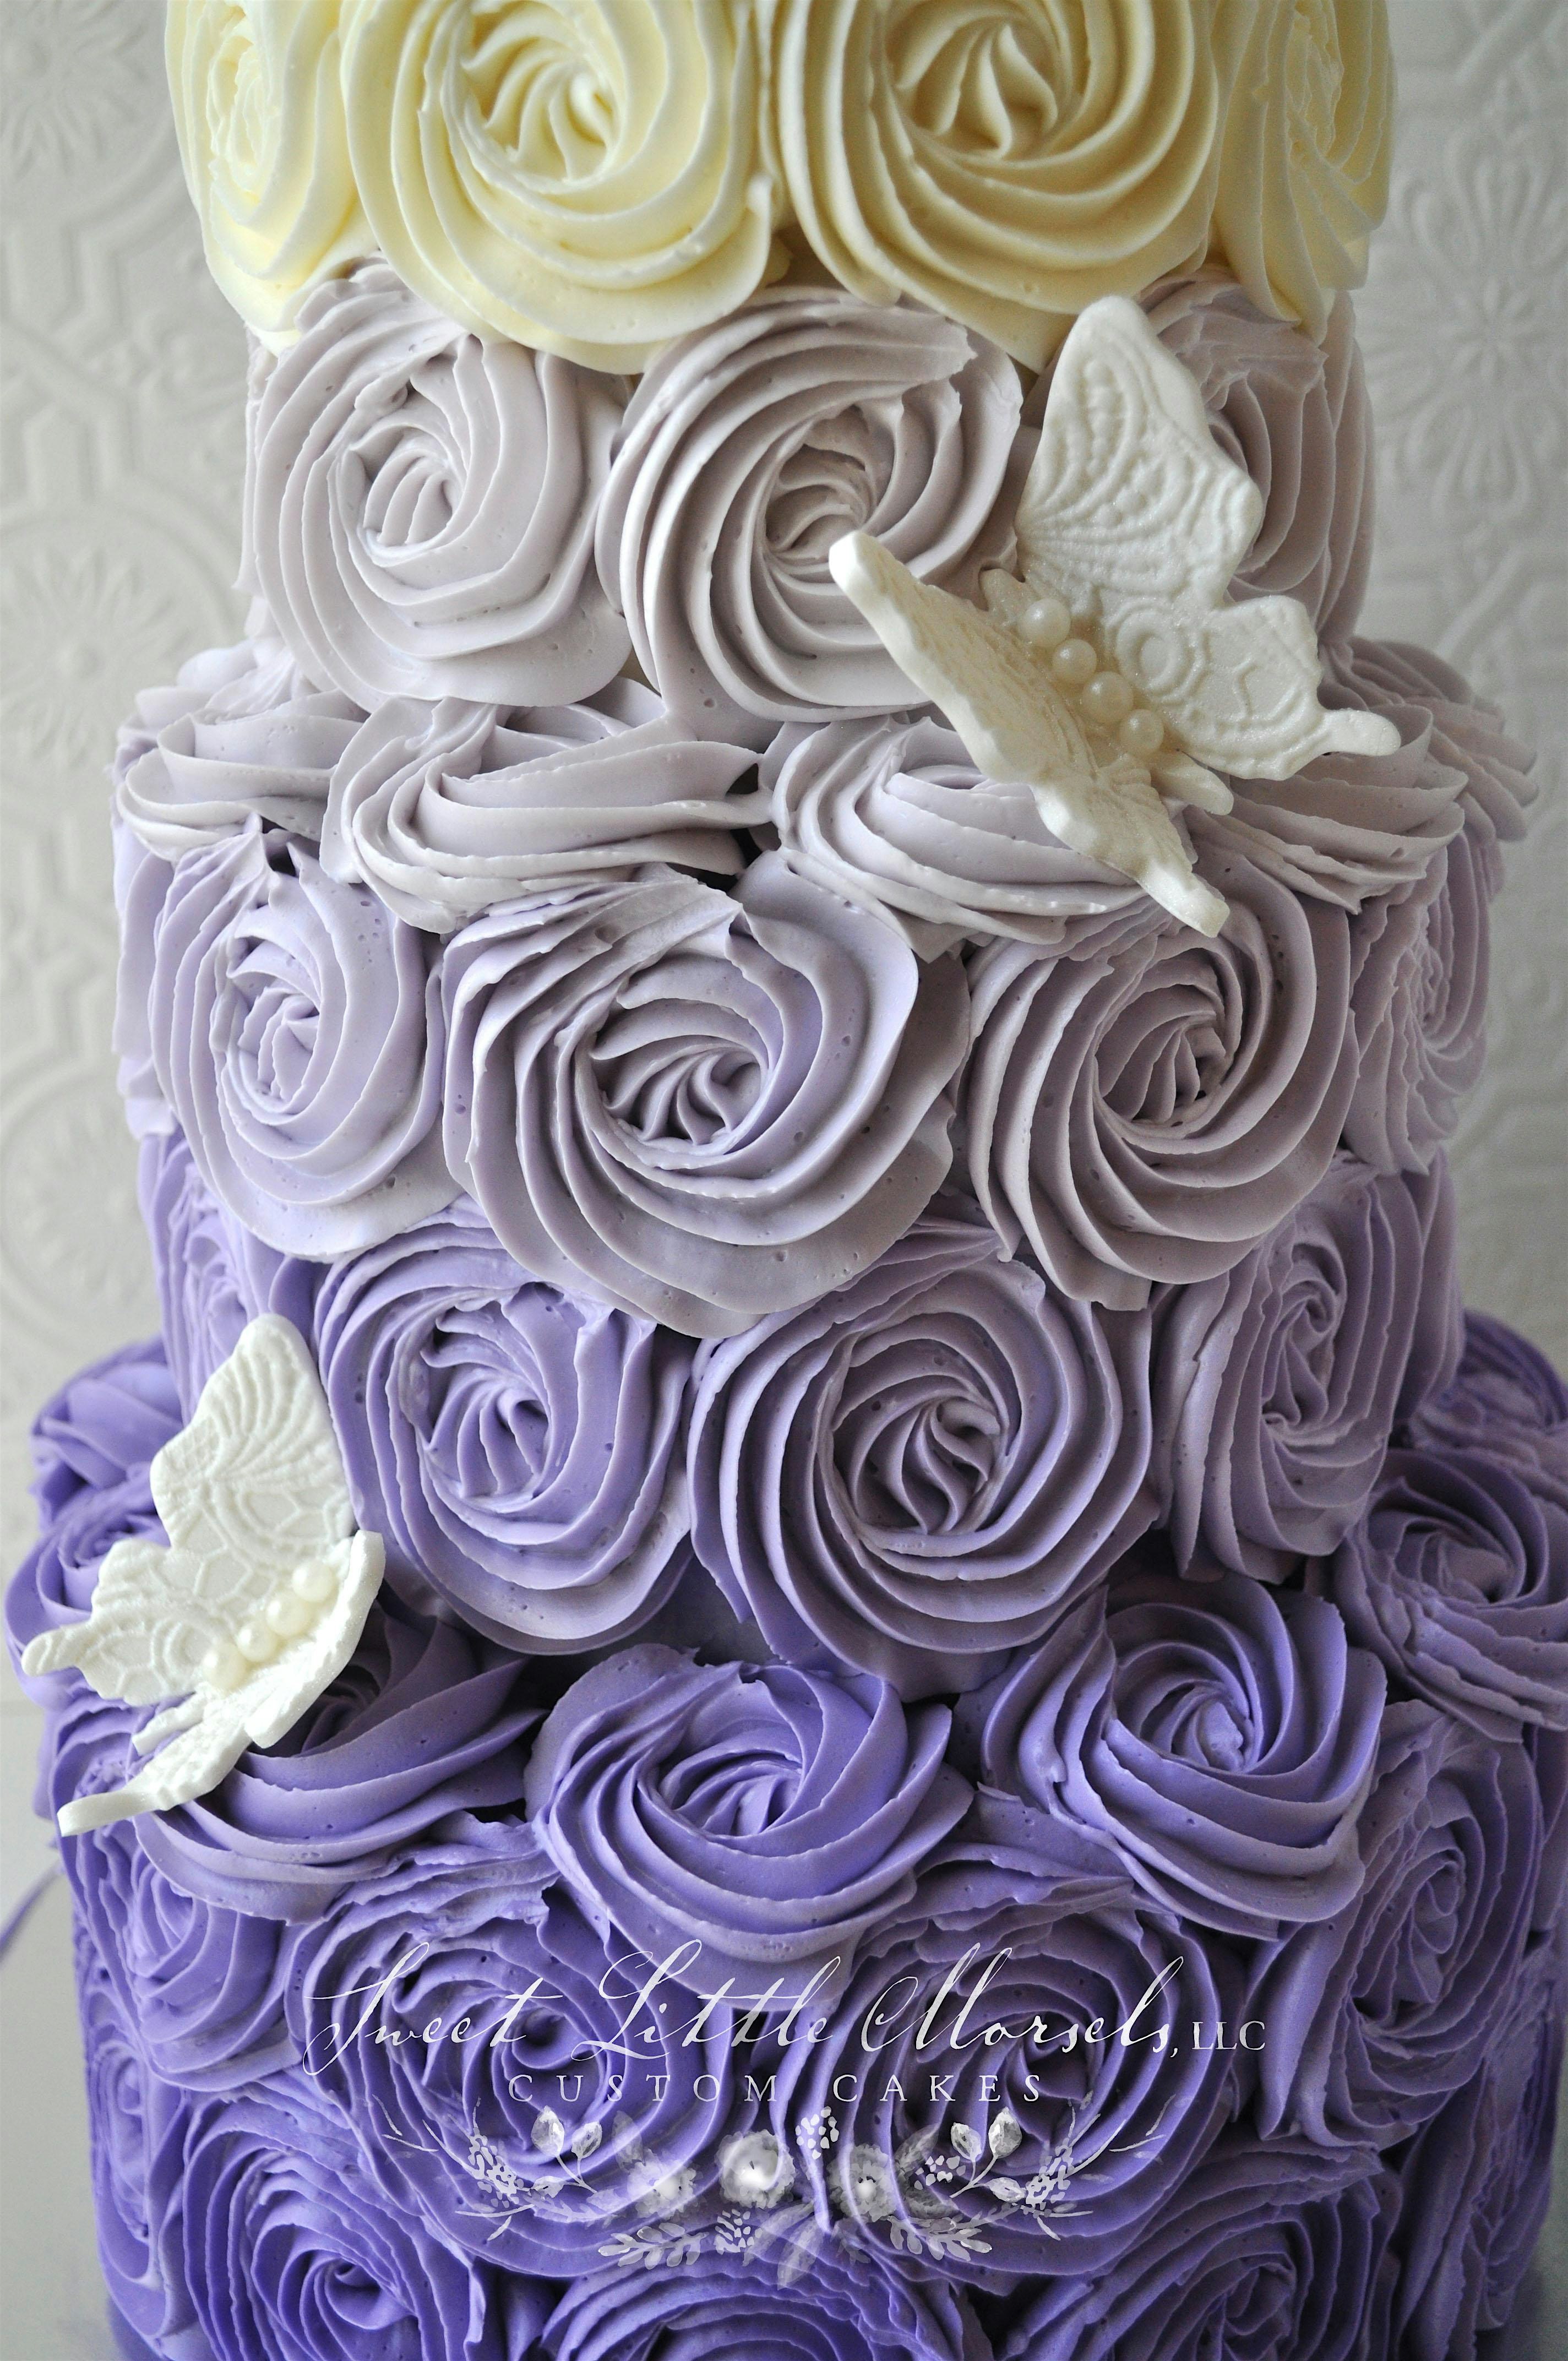 Sharp and Smooth Buttercream Cake with Buttercream Rosettes